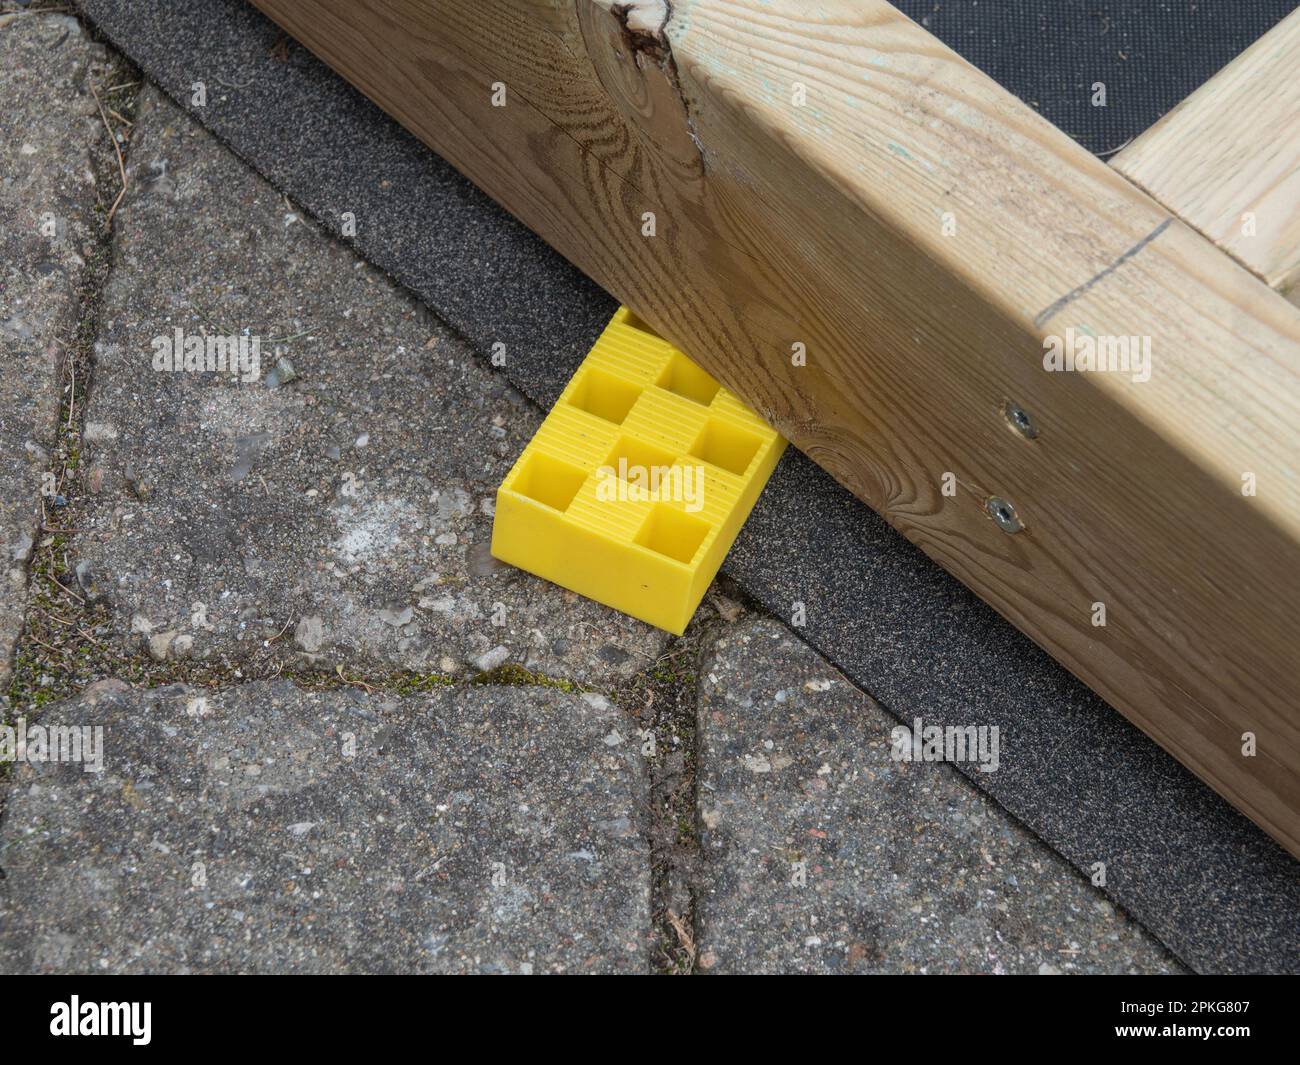 Impregnated timber wooden board stabilized with wedge of hard plastic. Stock Photo